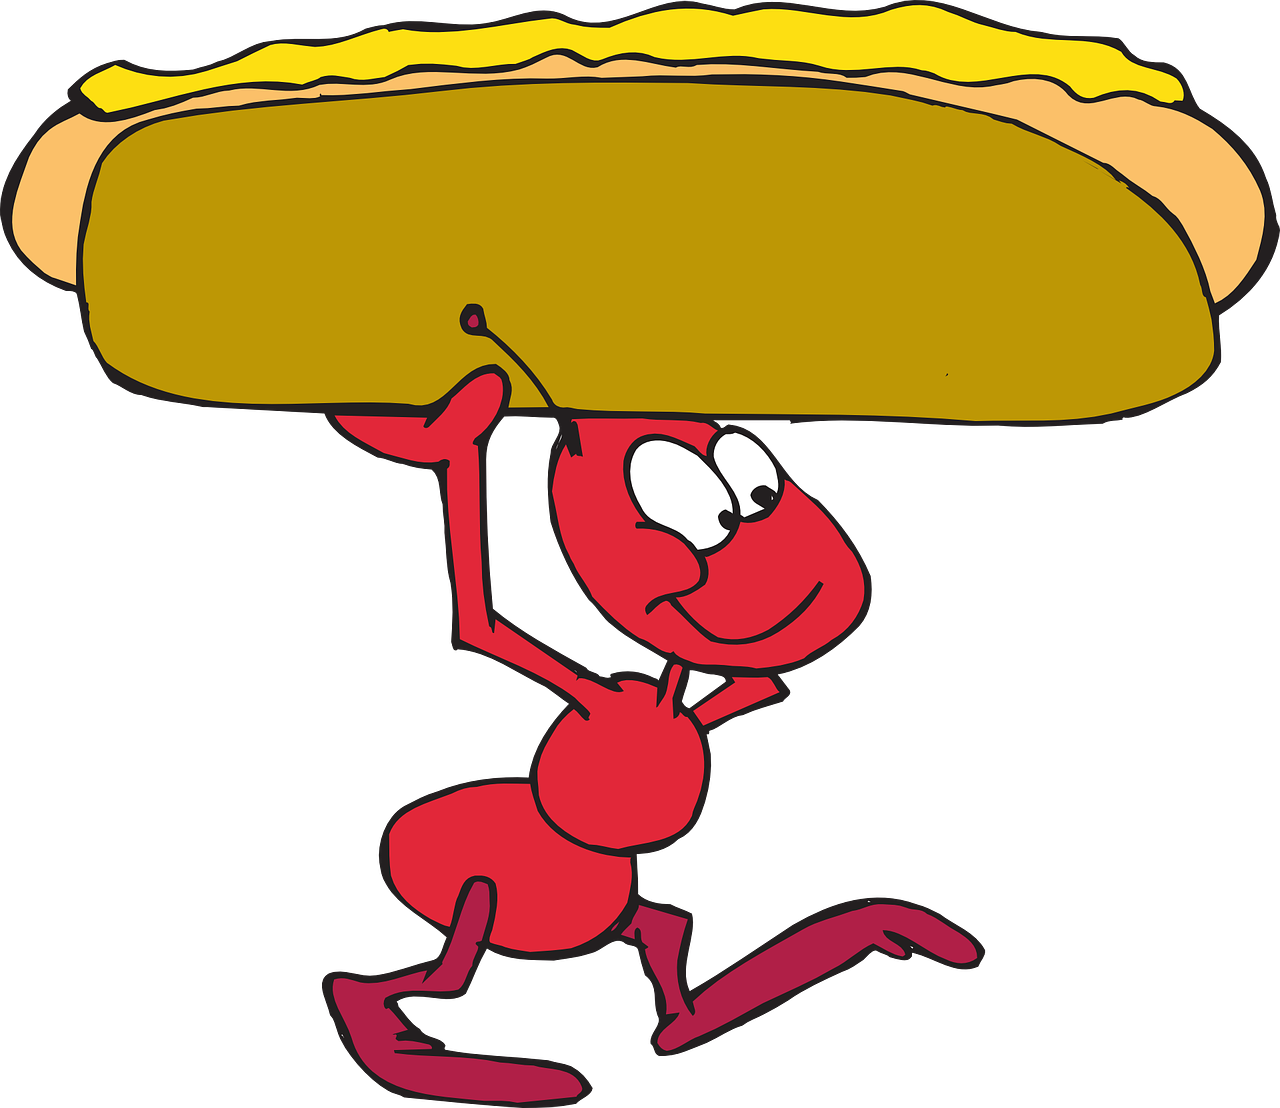 Ant - Cartoon Ant Carrying Food (1280x1108)